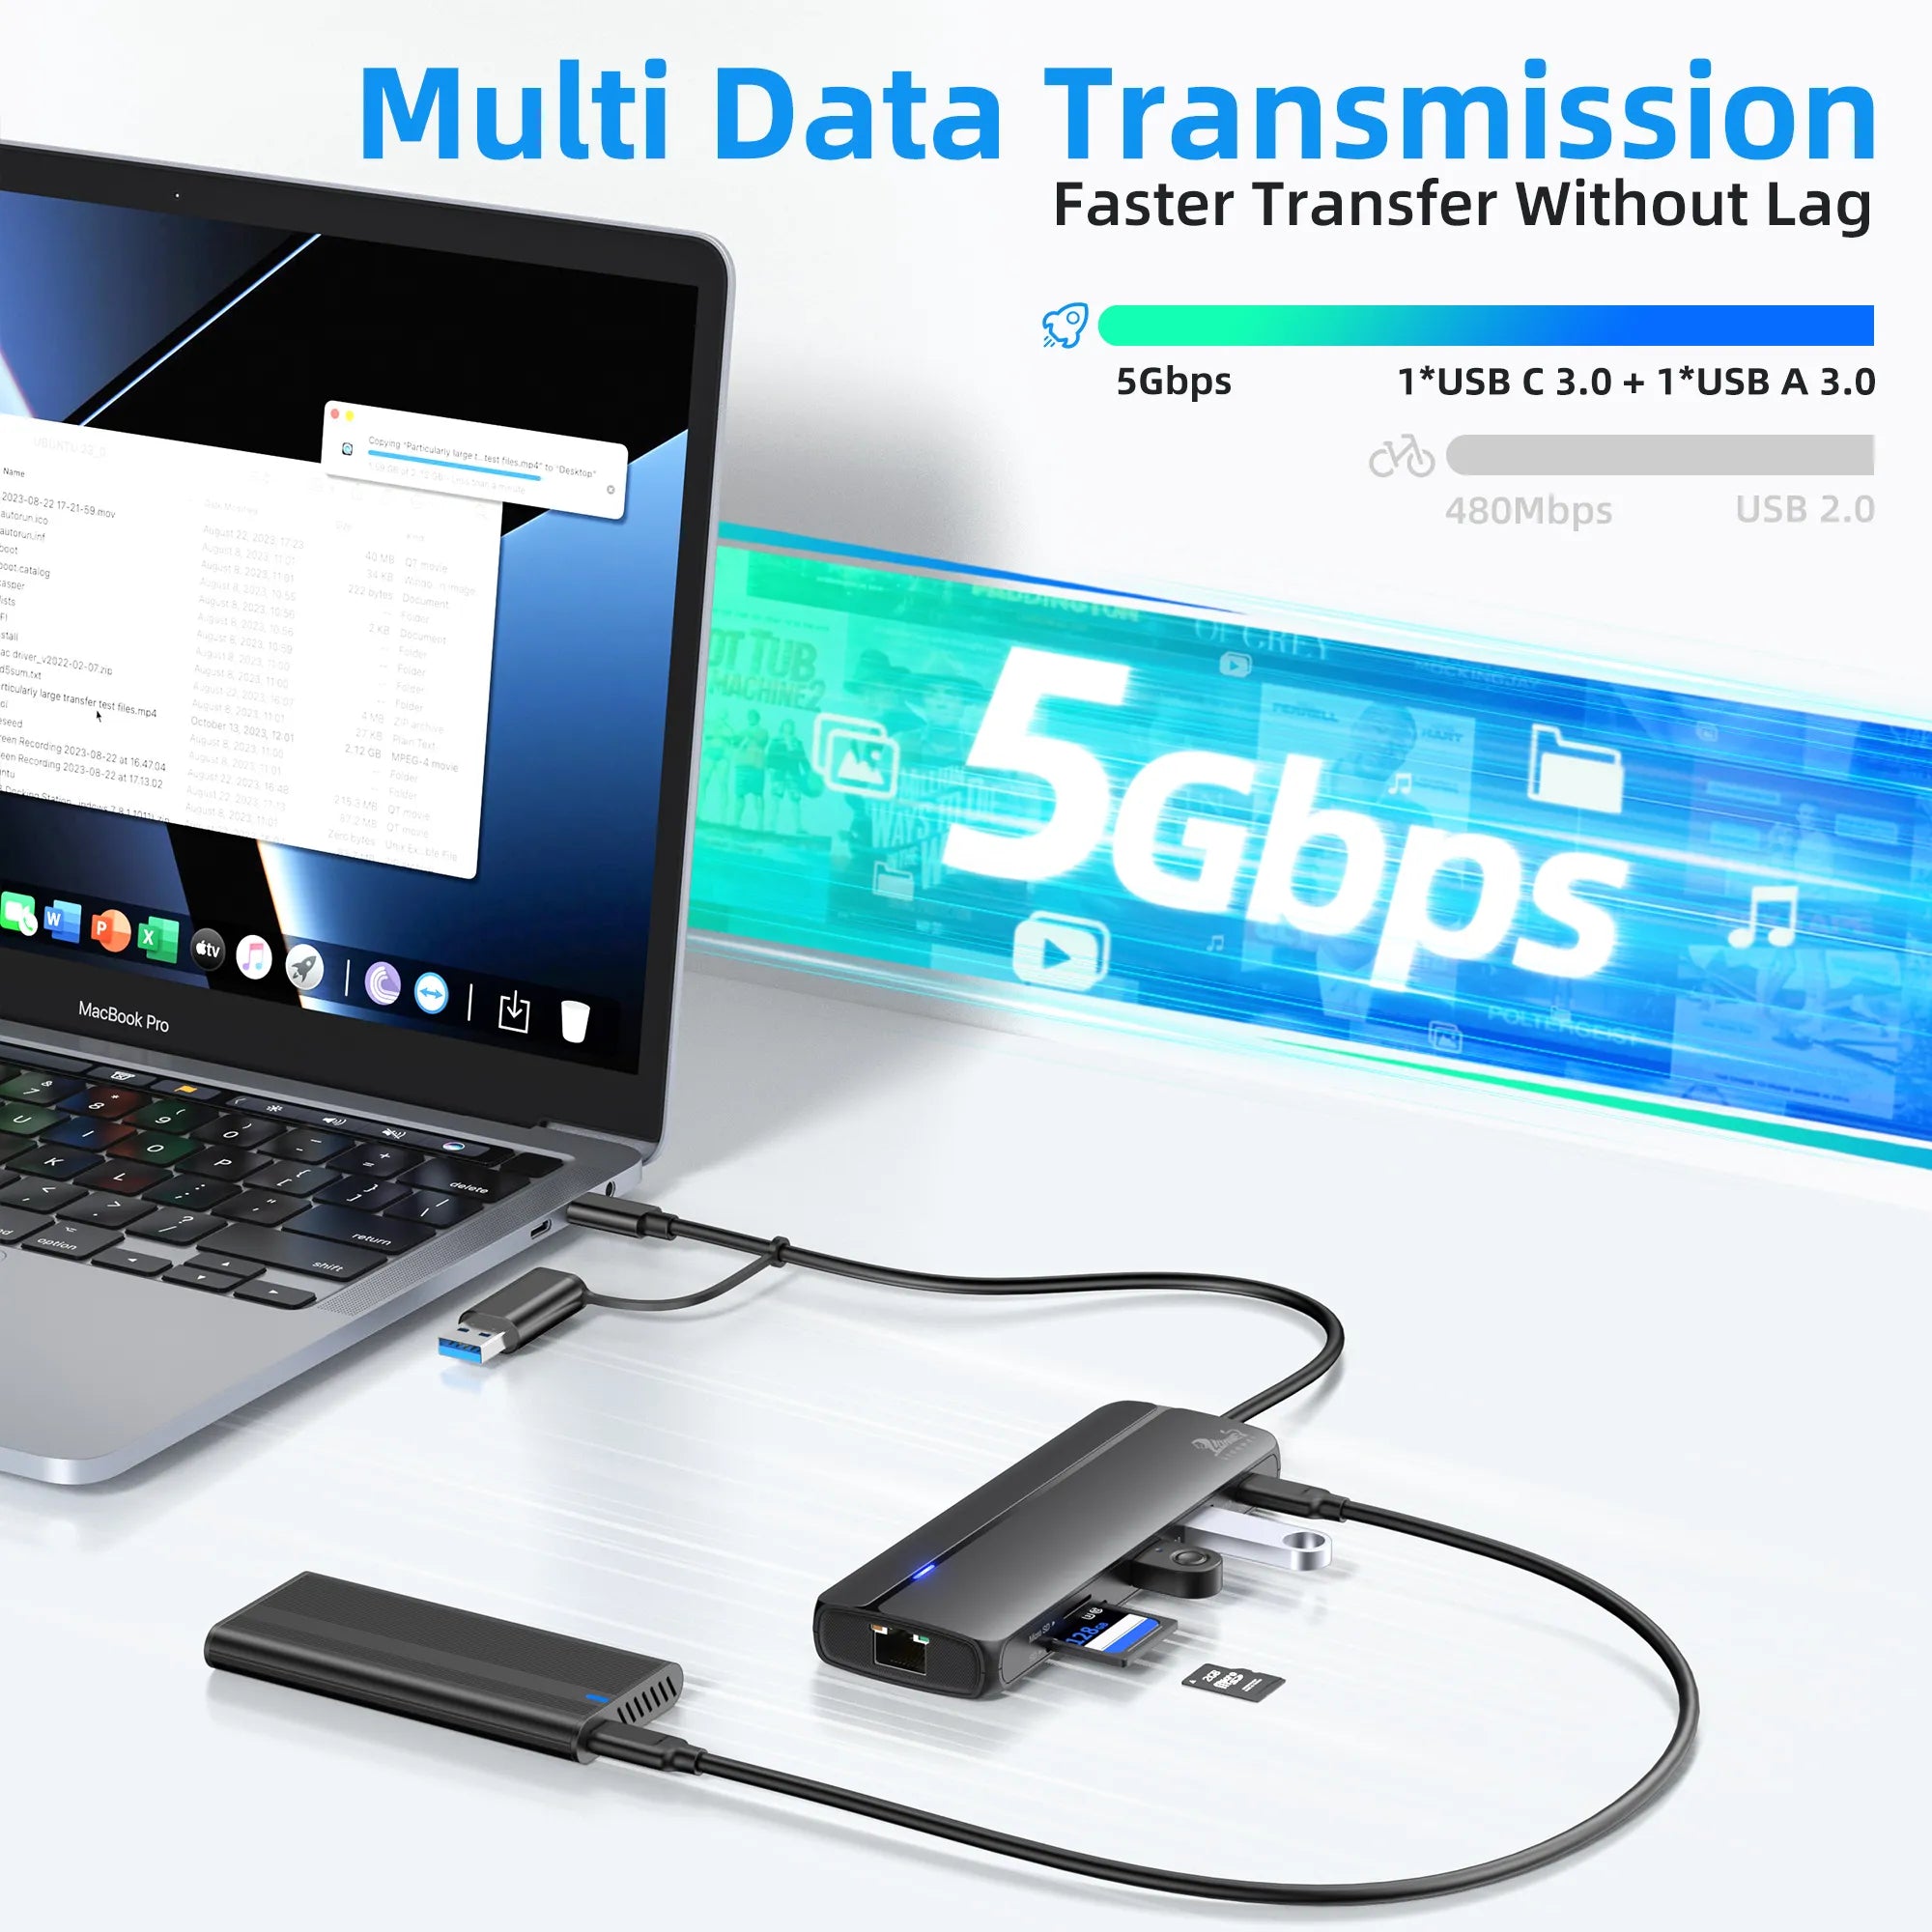 Multi Data fast Transfer without lag